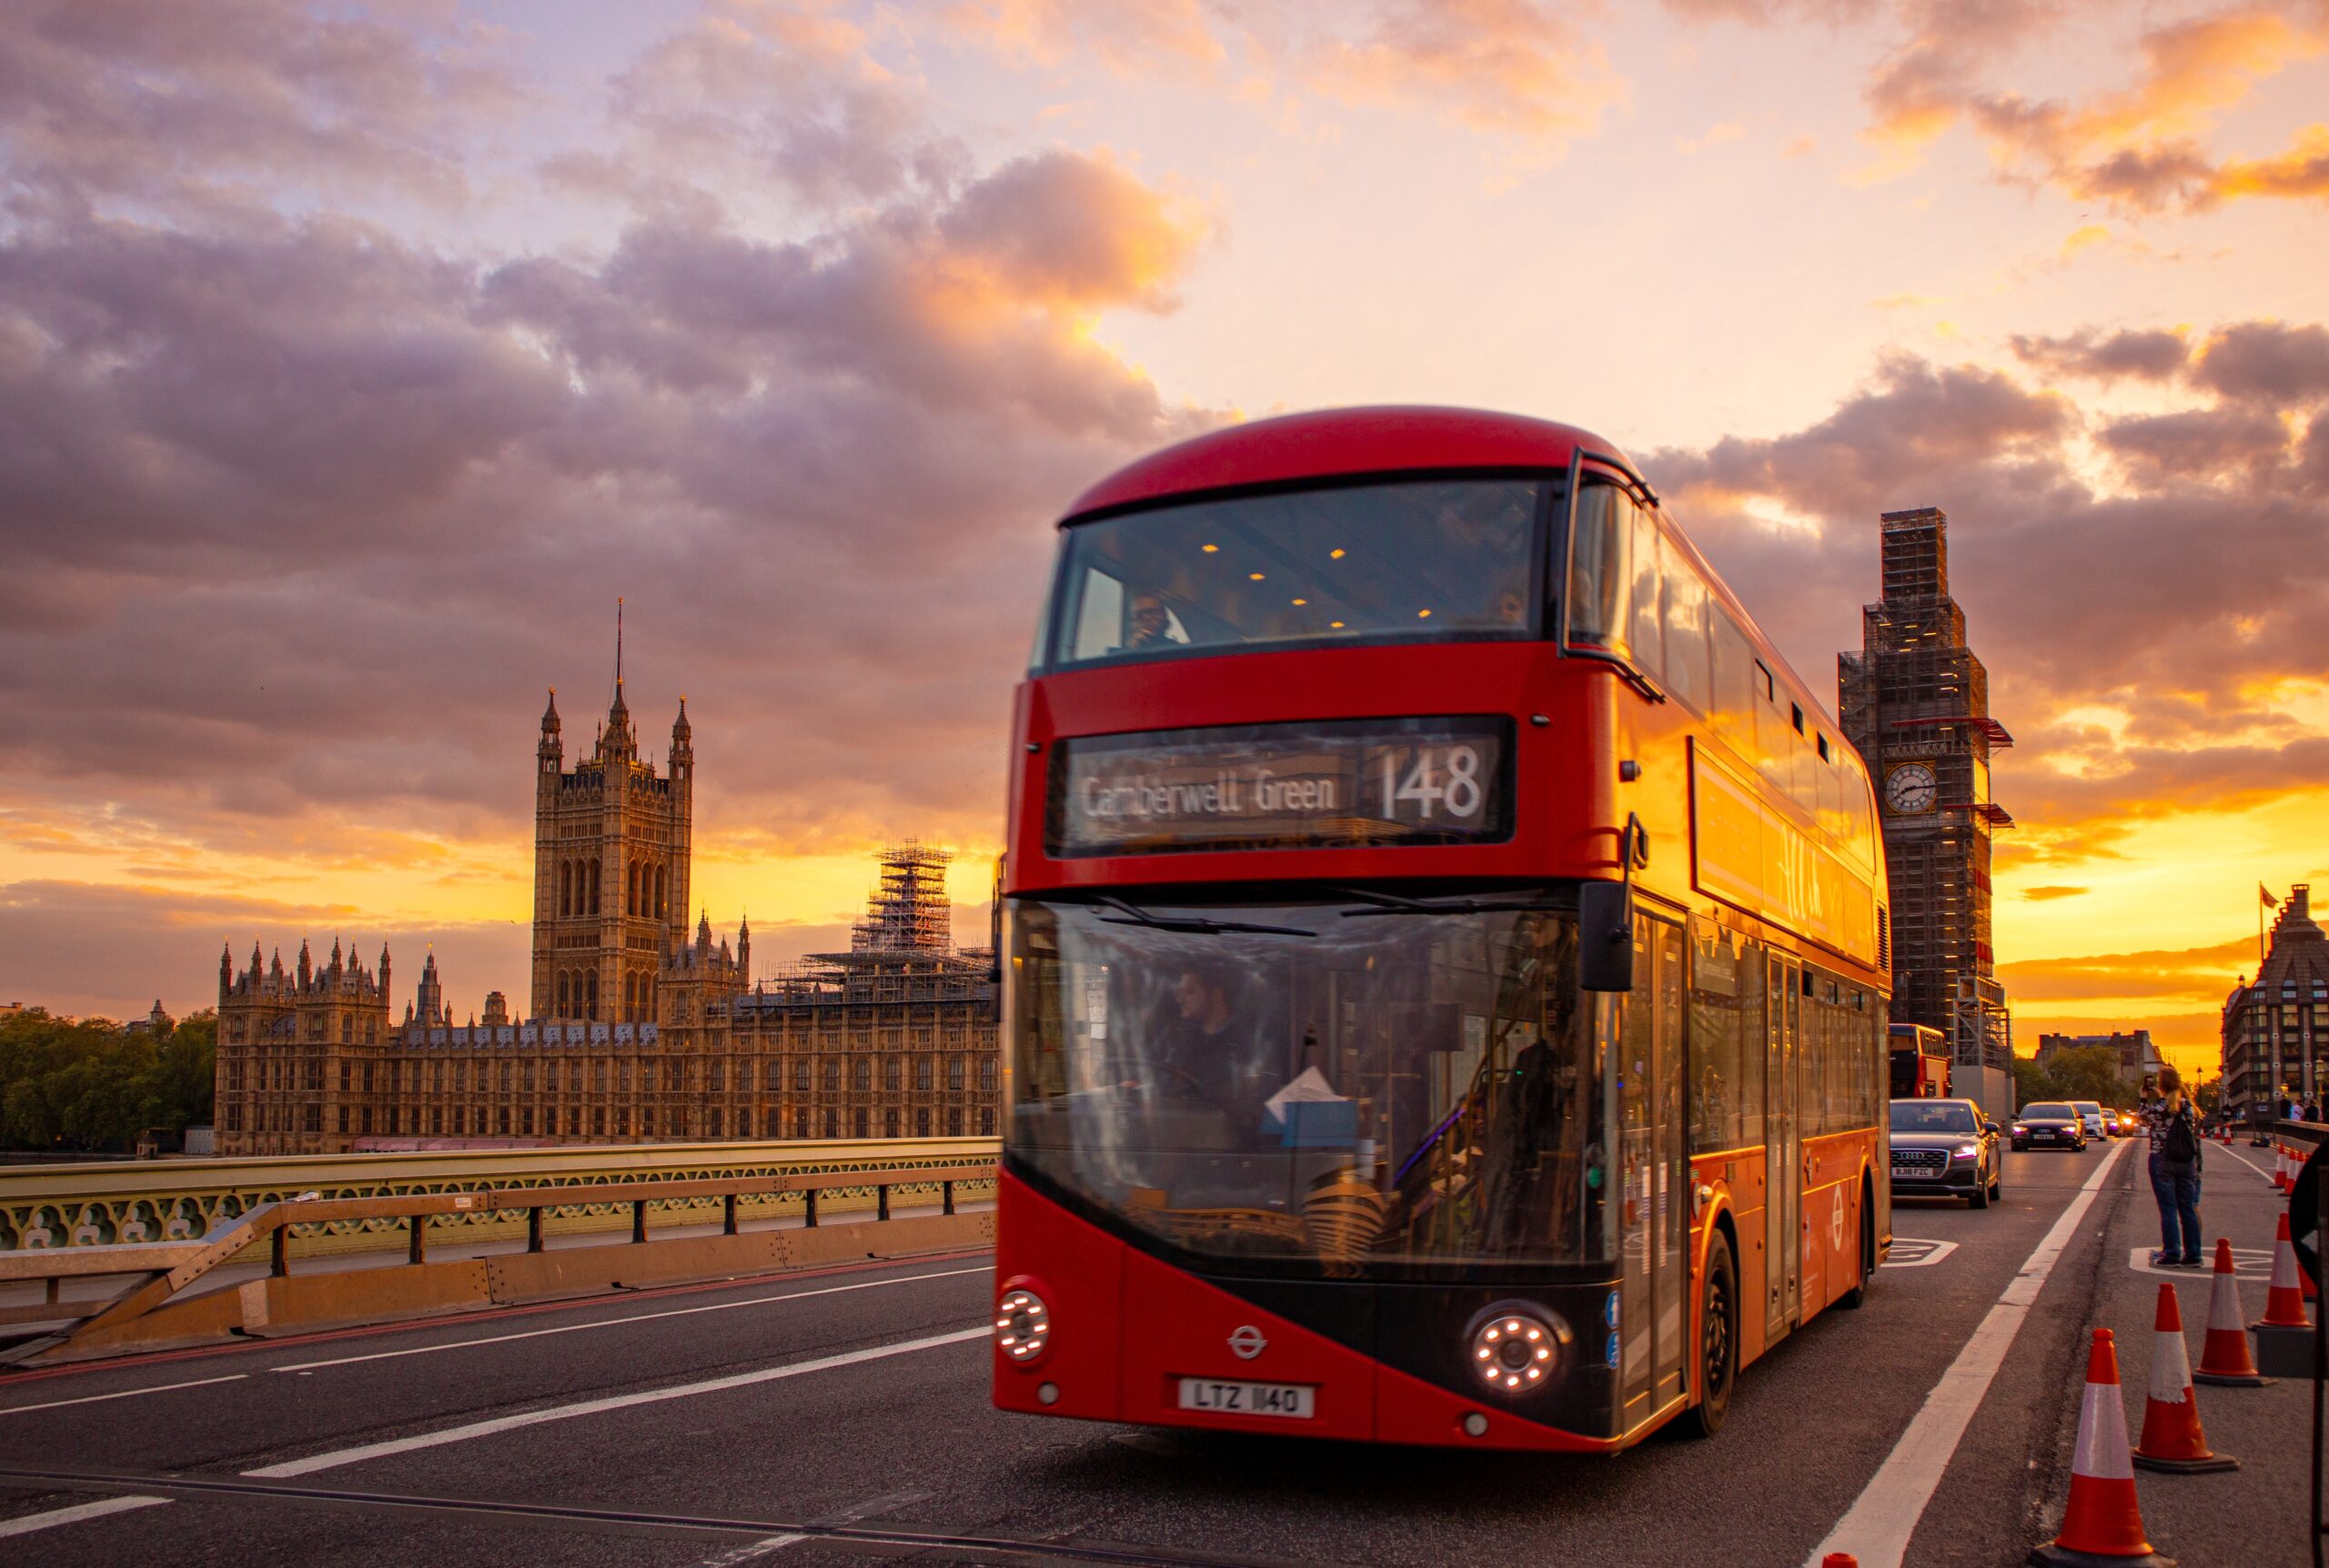 Travelers have many transportation options while in London. People taking short trips should depend on public transportation for convenient and affordable travel.